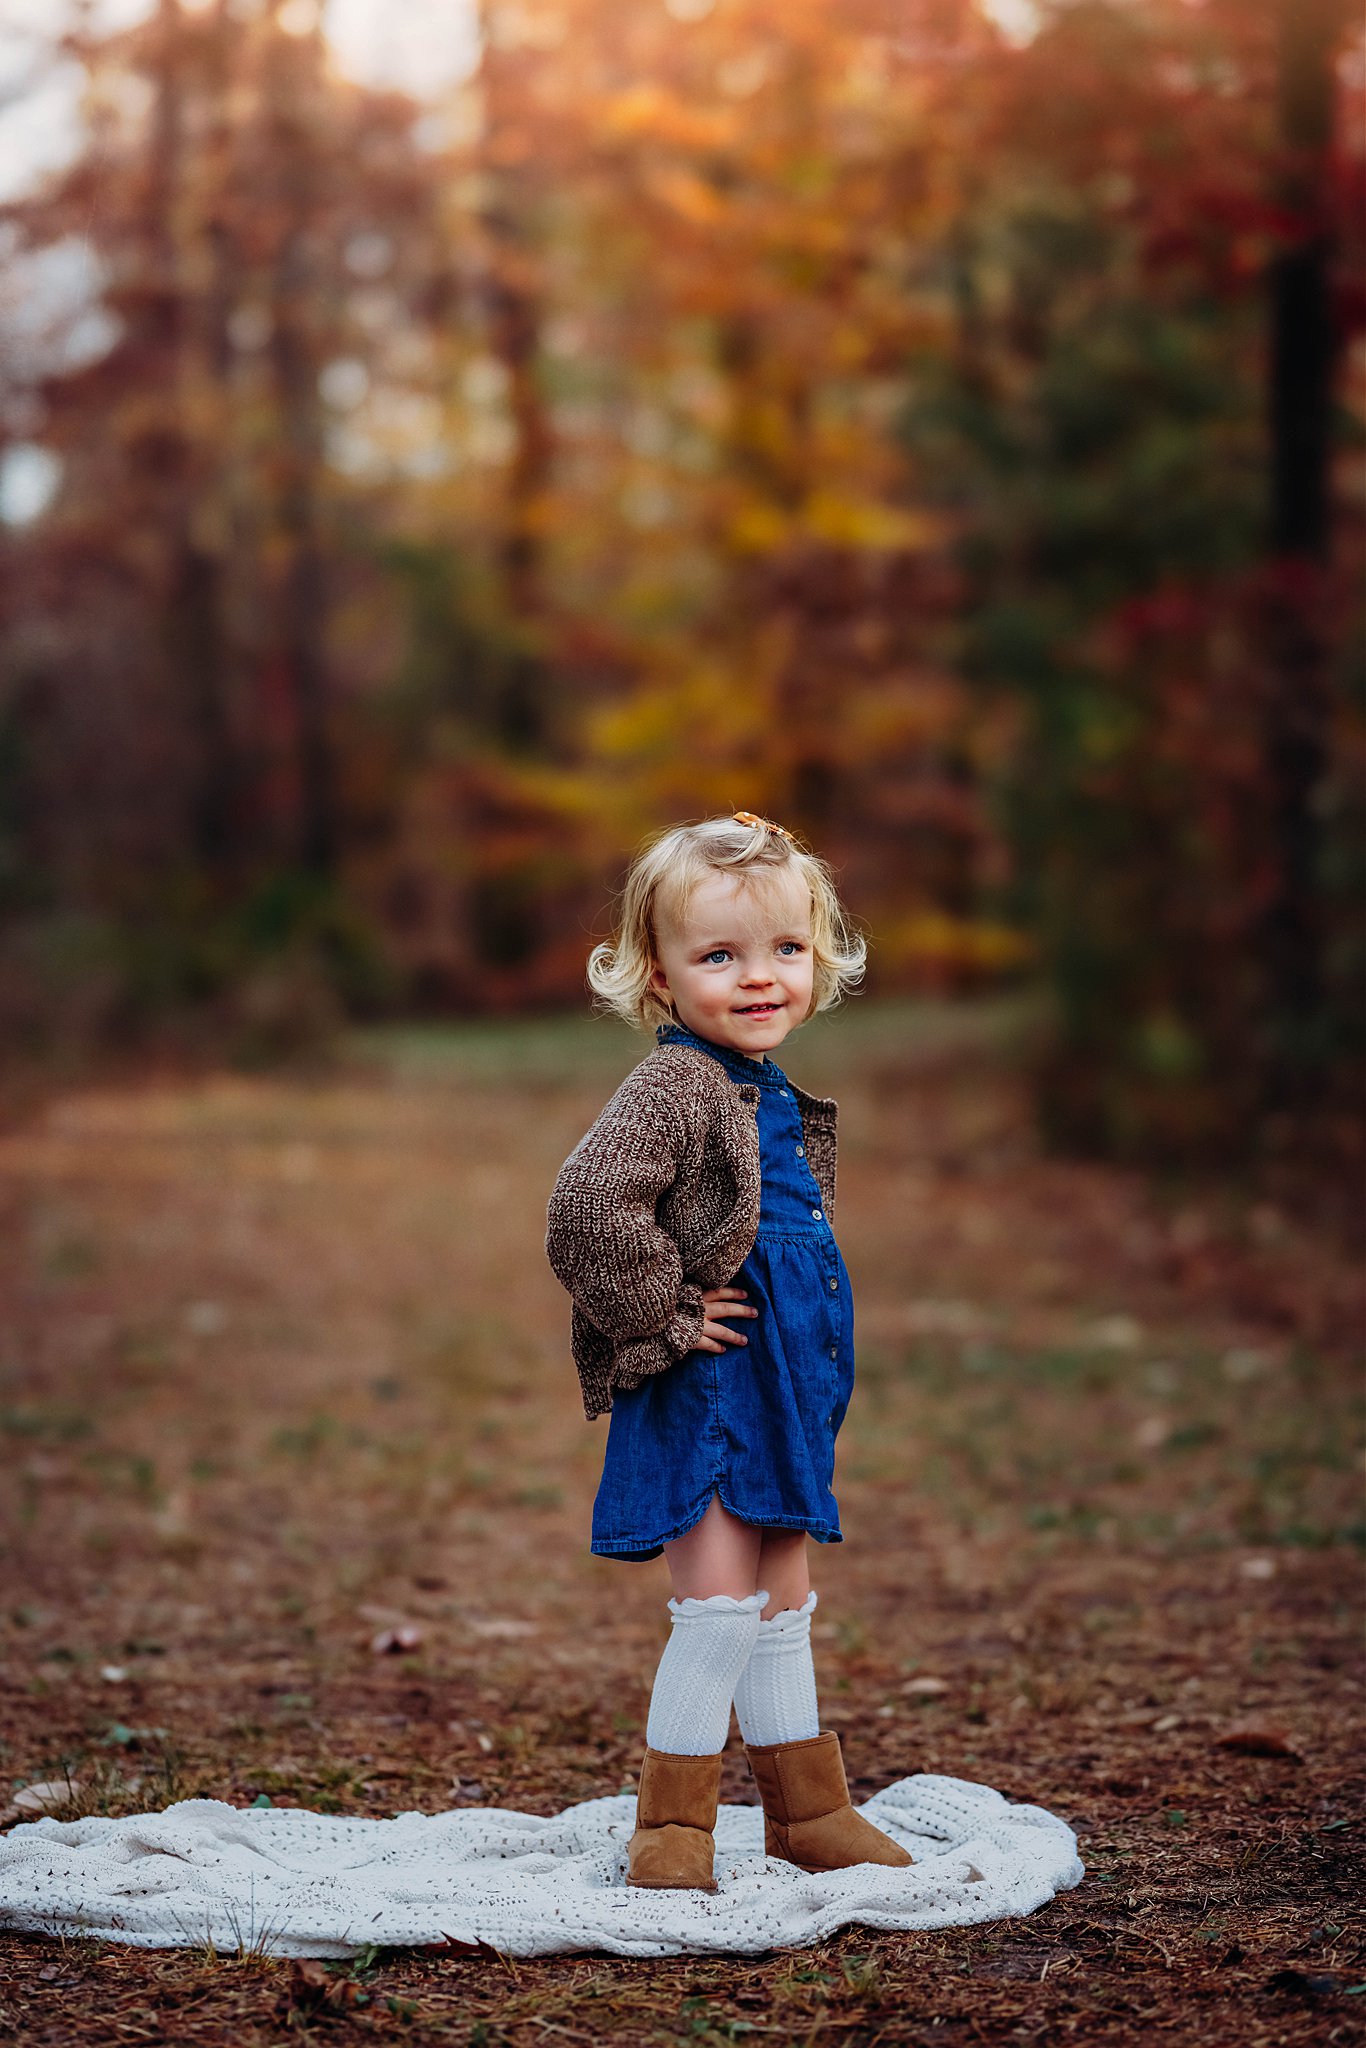 A young girl stands with hands on her hips in a denim dress in a park in fall raleigh pediatric dentists